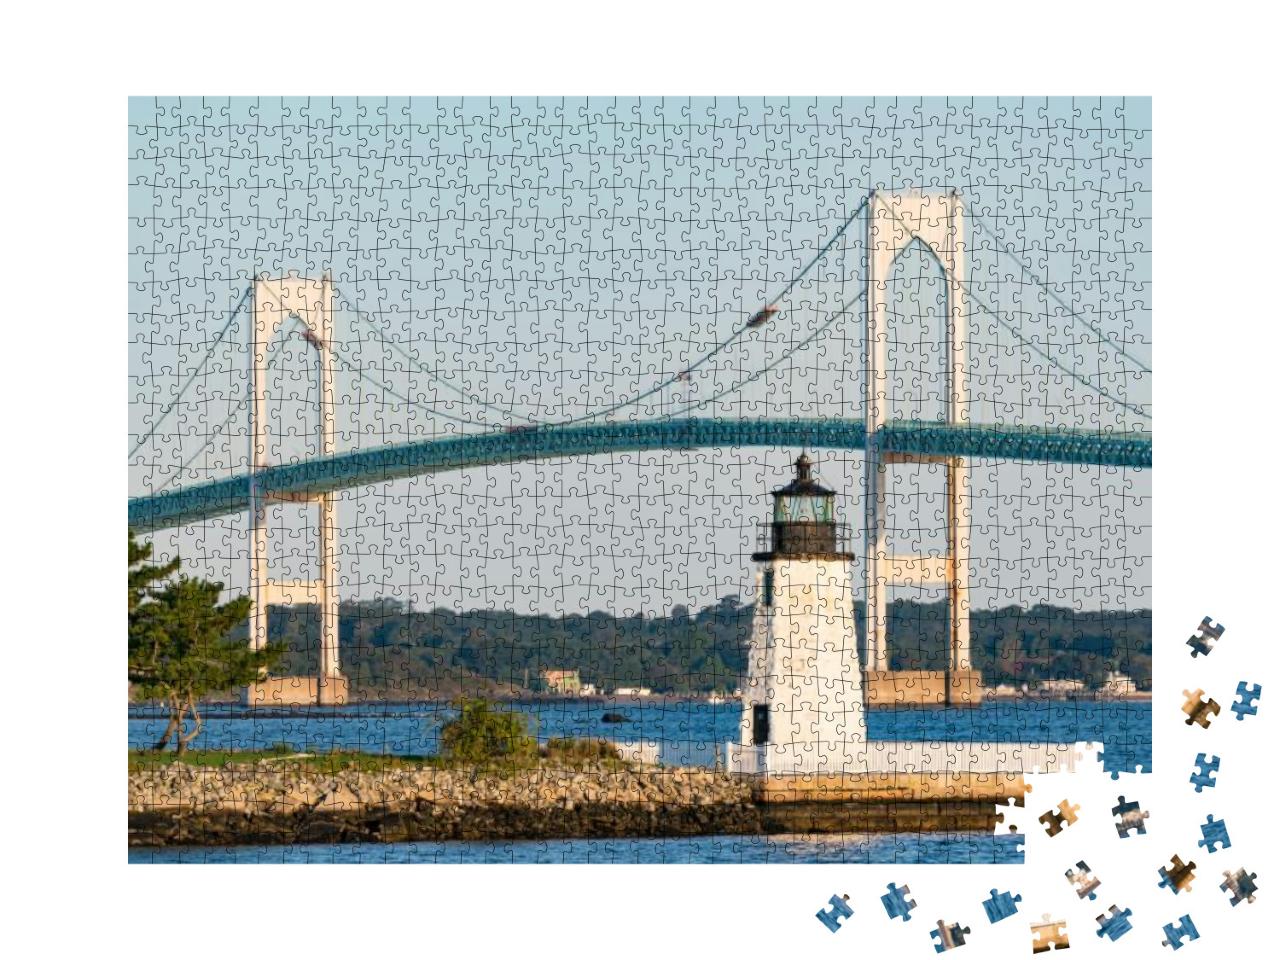 Goat Island Lighthouse in Newport, Rhode Island... Jigsaw Puzzle with 1000 pieces